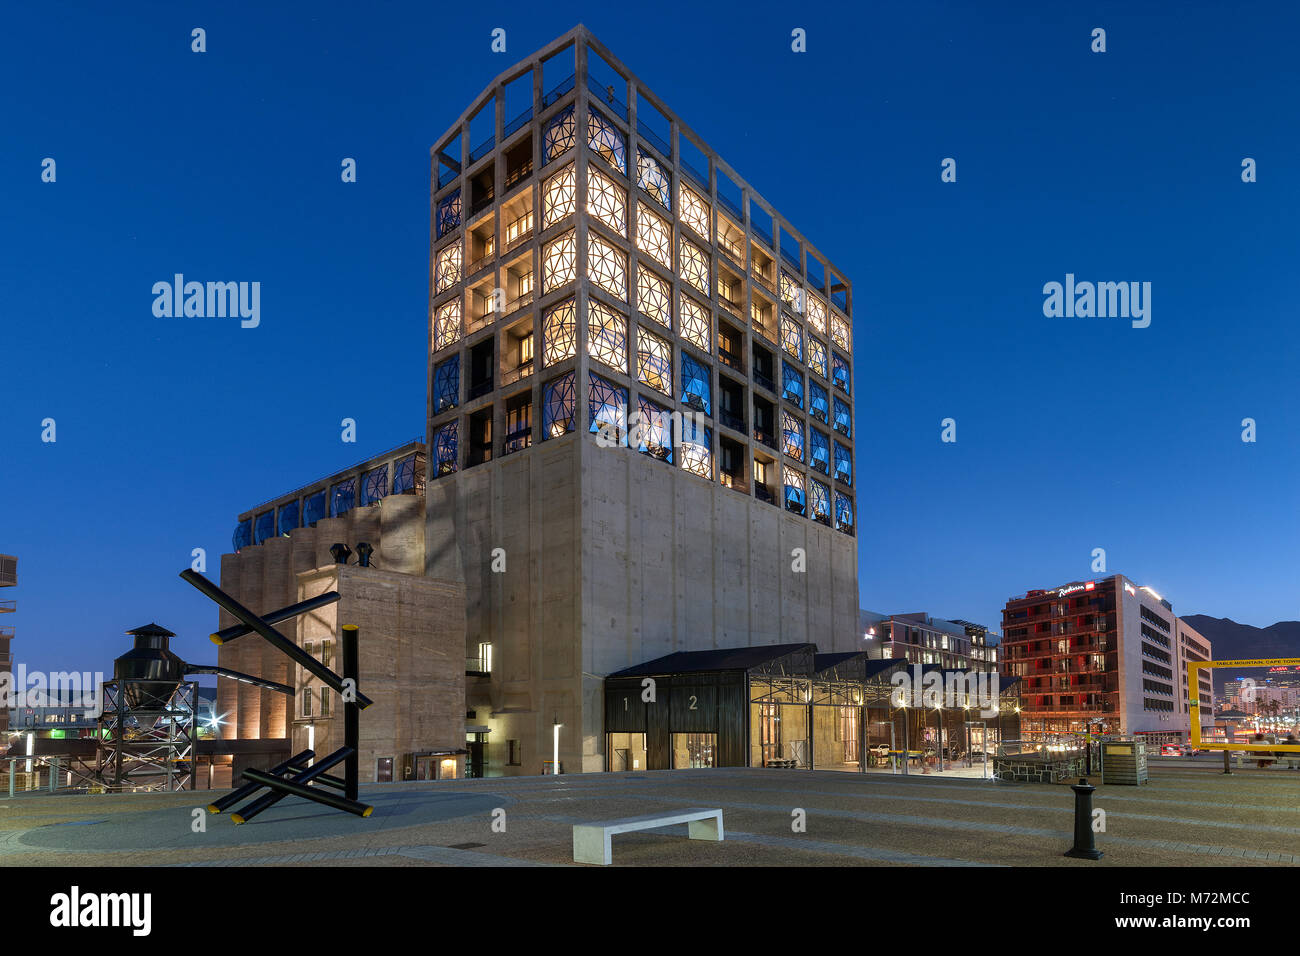 Dusk view of the Zeitz MOCAA (Museum of Contemporary African Art) and the Silo Hotel building in the Cape Town Waterfront. Stock Photo